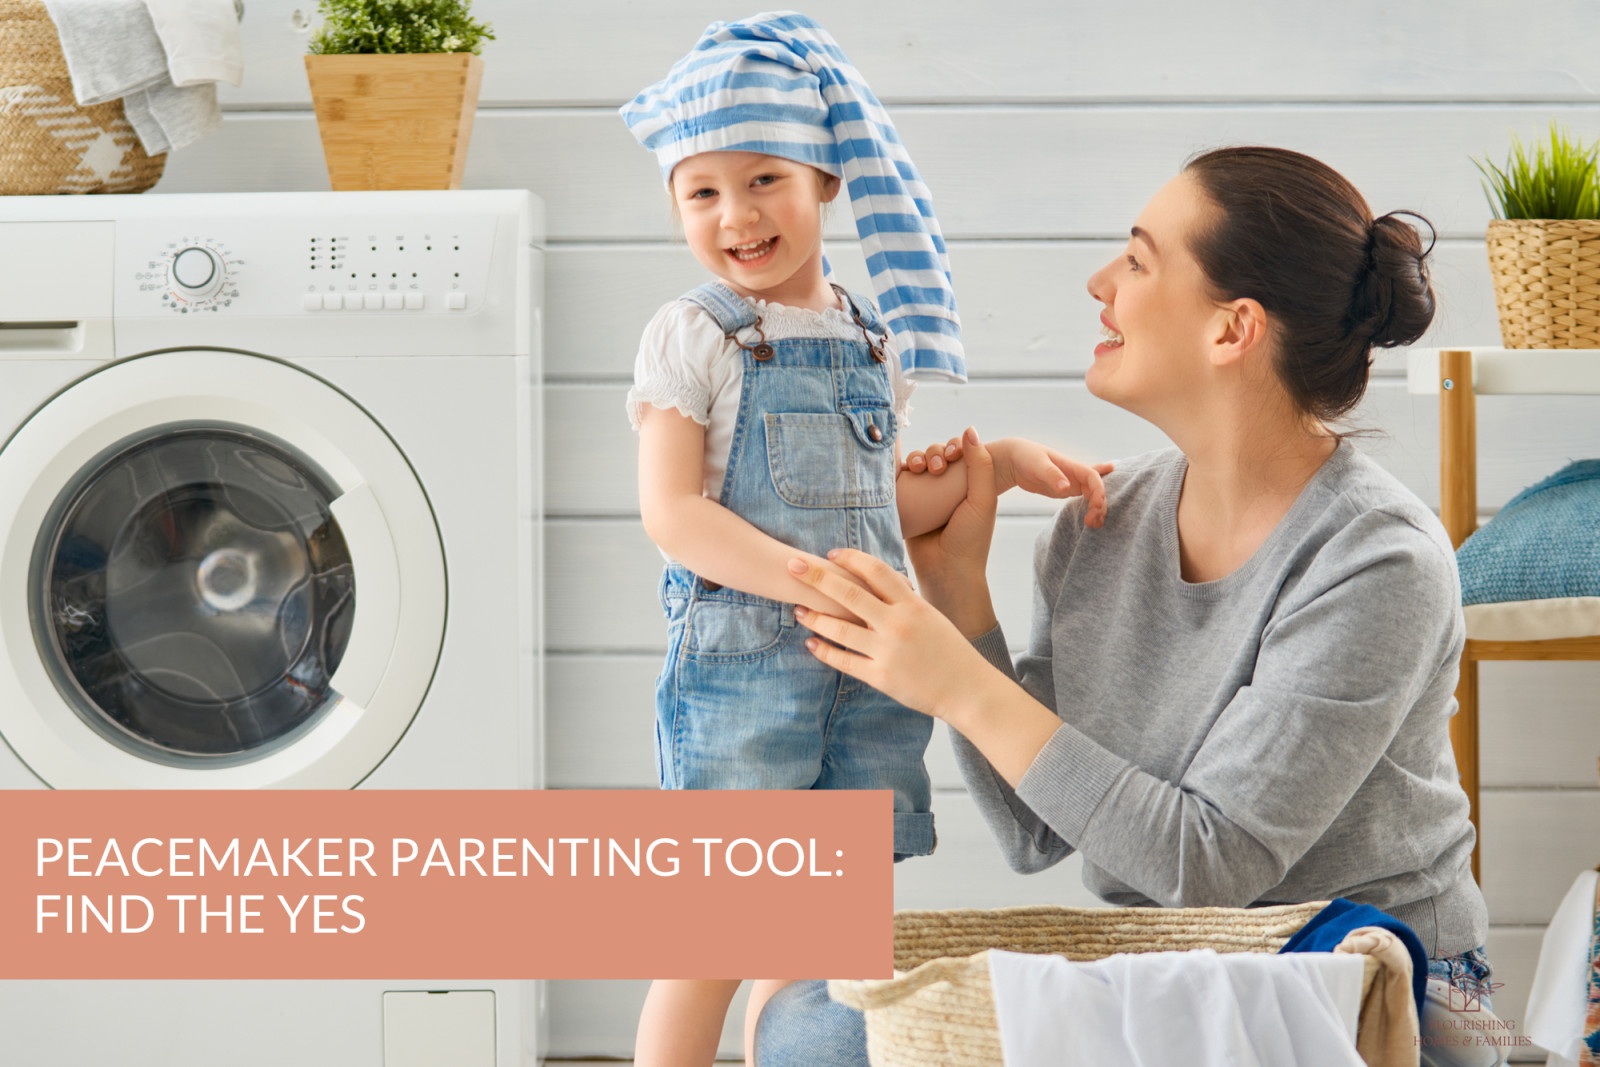 Peacemaker Parenting Tool: Find the Yes